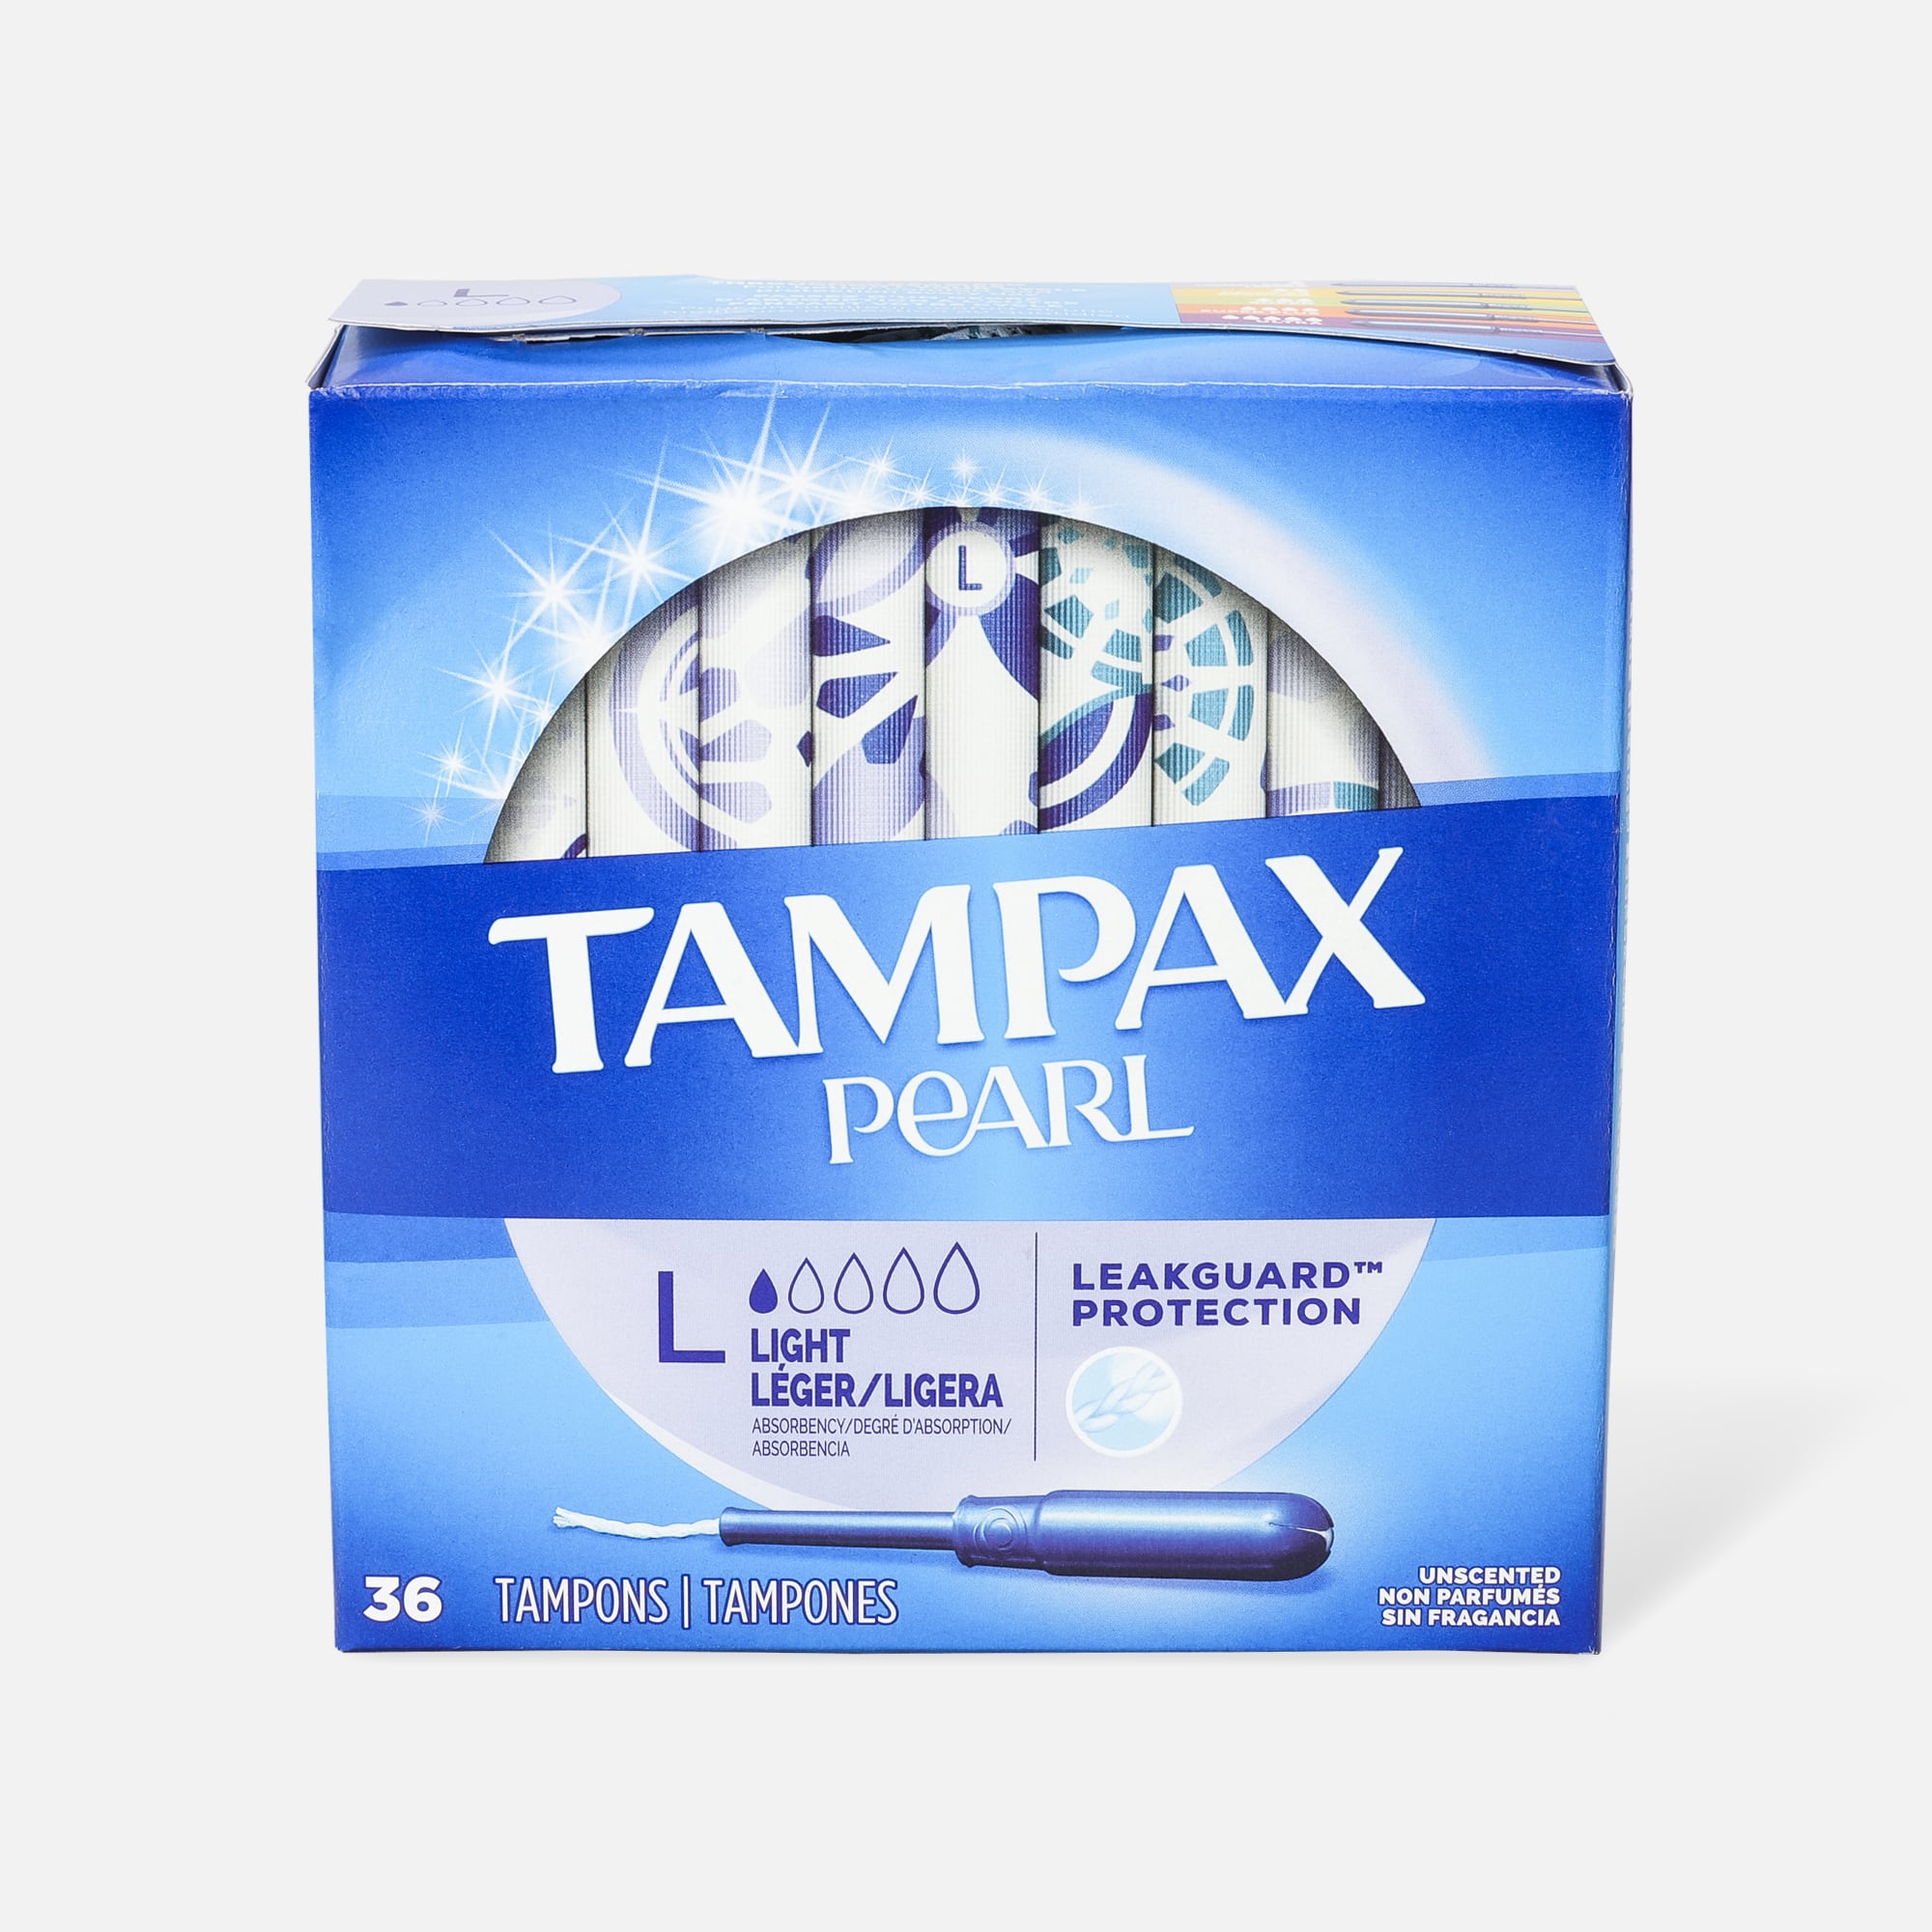 Tampax Pearl Super Unscented Tampons 36 ct Box